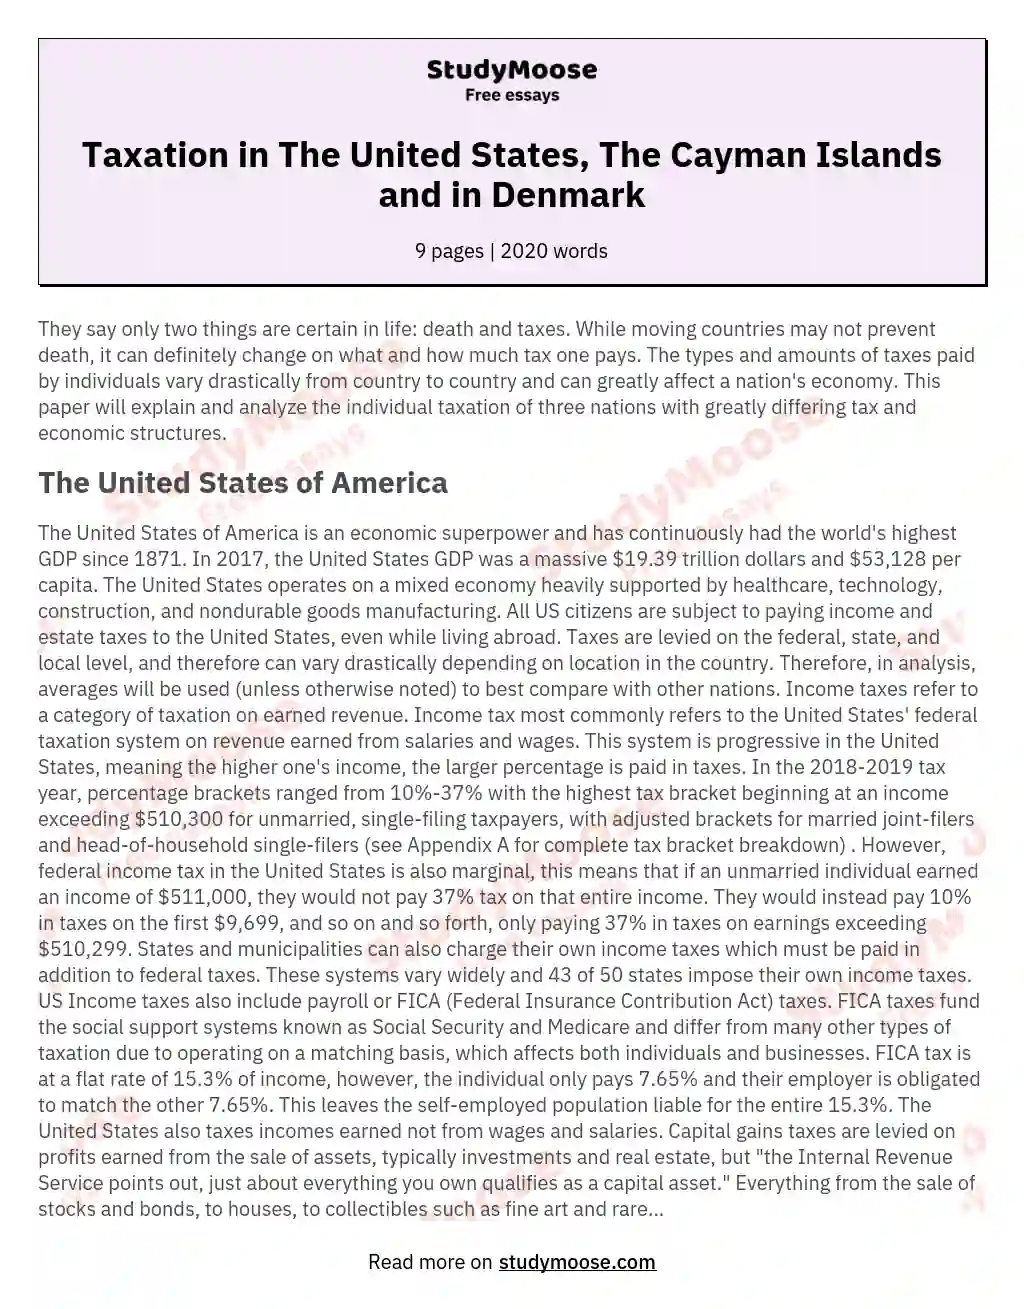 Taxation in The United States, The Cayman Islands and in Denmark